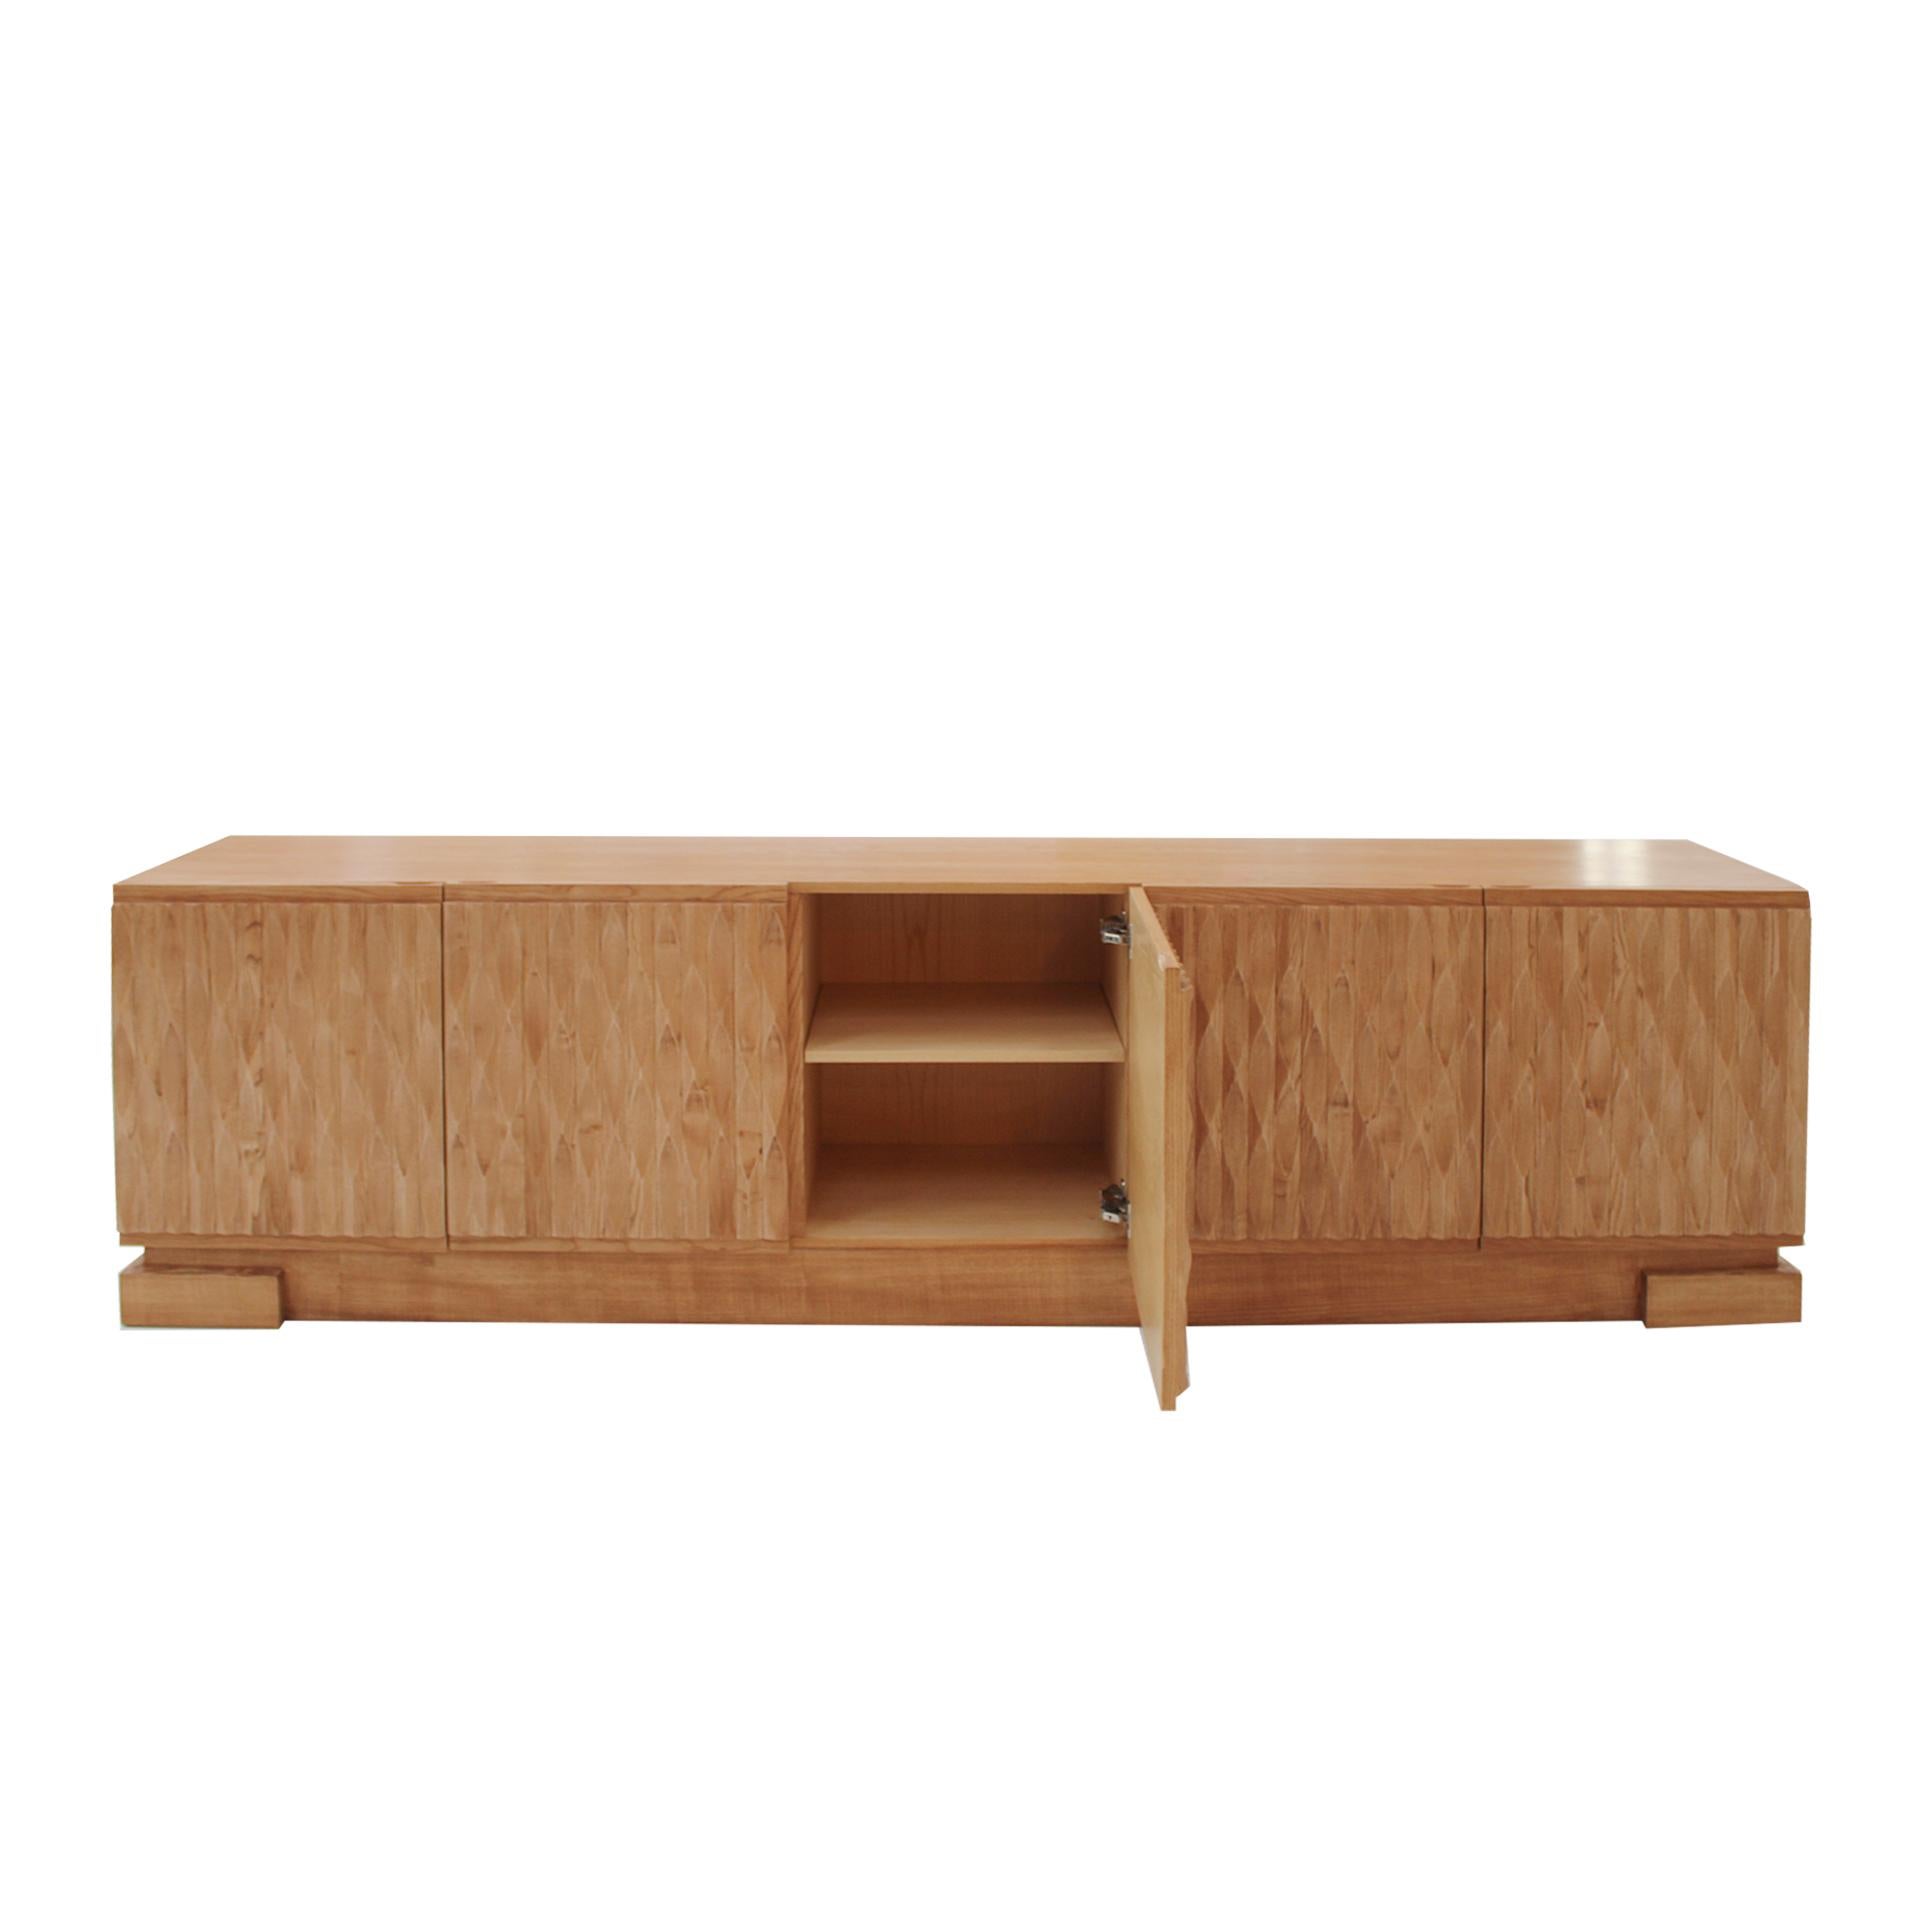 Brutalist Italian Oak Wood Sideboard with Hand Carved Patterns in the Doors, Italy